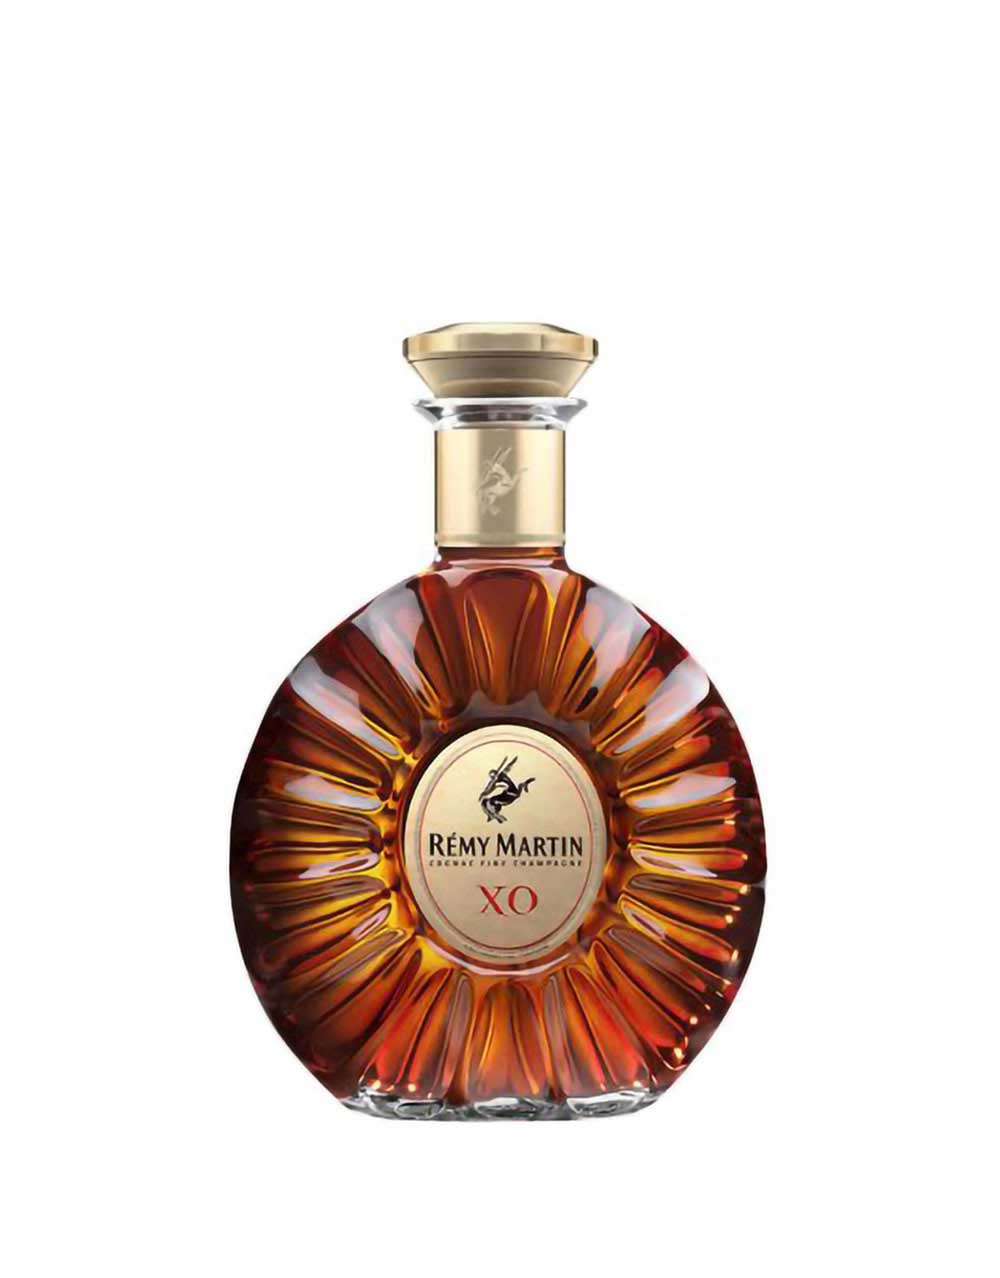 Buy LOUIS XIII Cognac  Custom Engraving Available – Louis XIII (Staging)